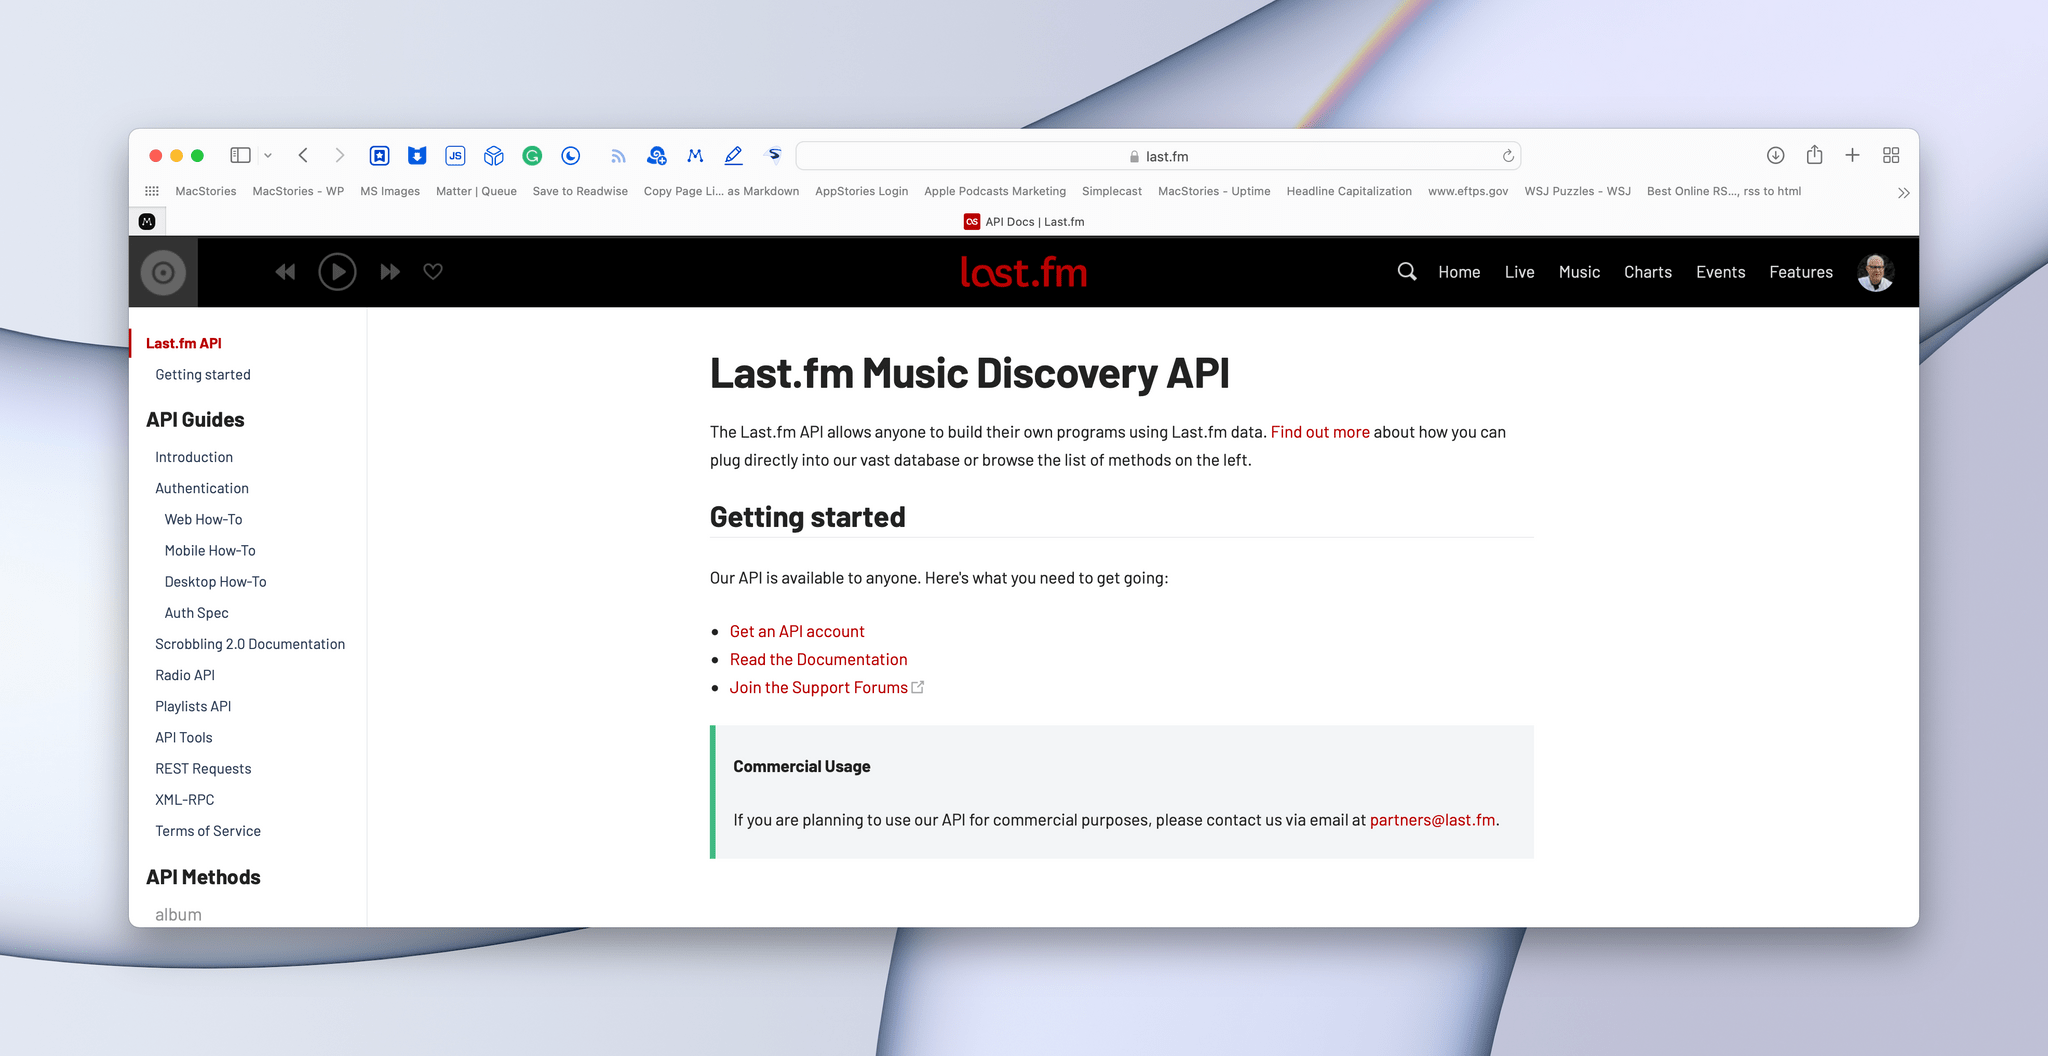 Last.fm's API isn't easy to use, but it opens up some interesting music discovery possibilities.